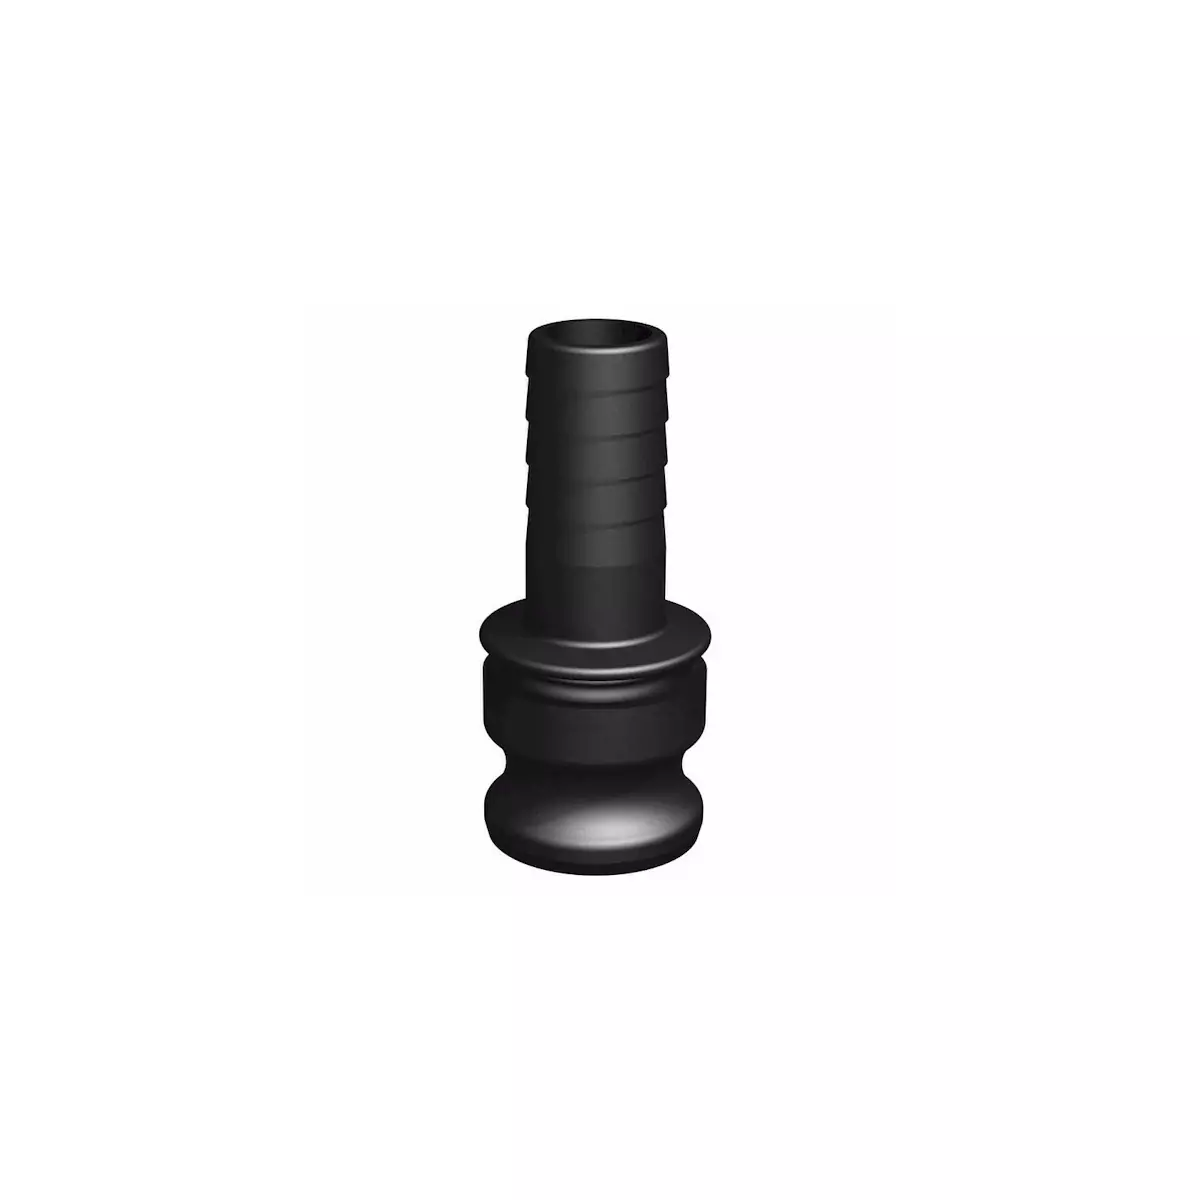 Raccord camlock male 1''1/4 - embout male cannelé droit 1''1/4 ( 32mm )